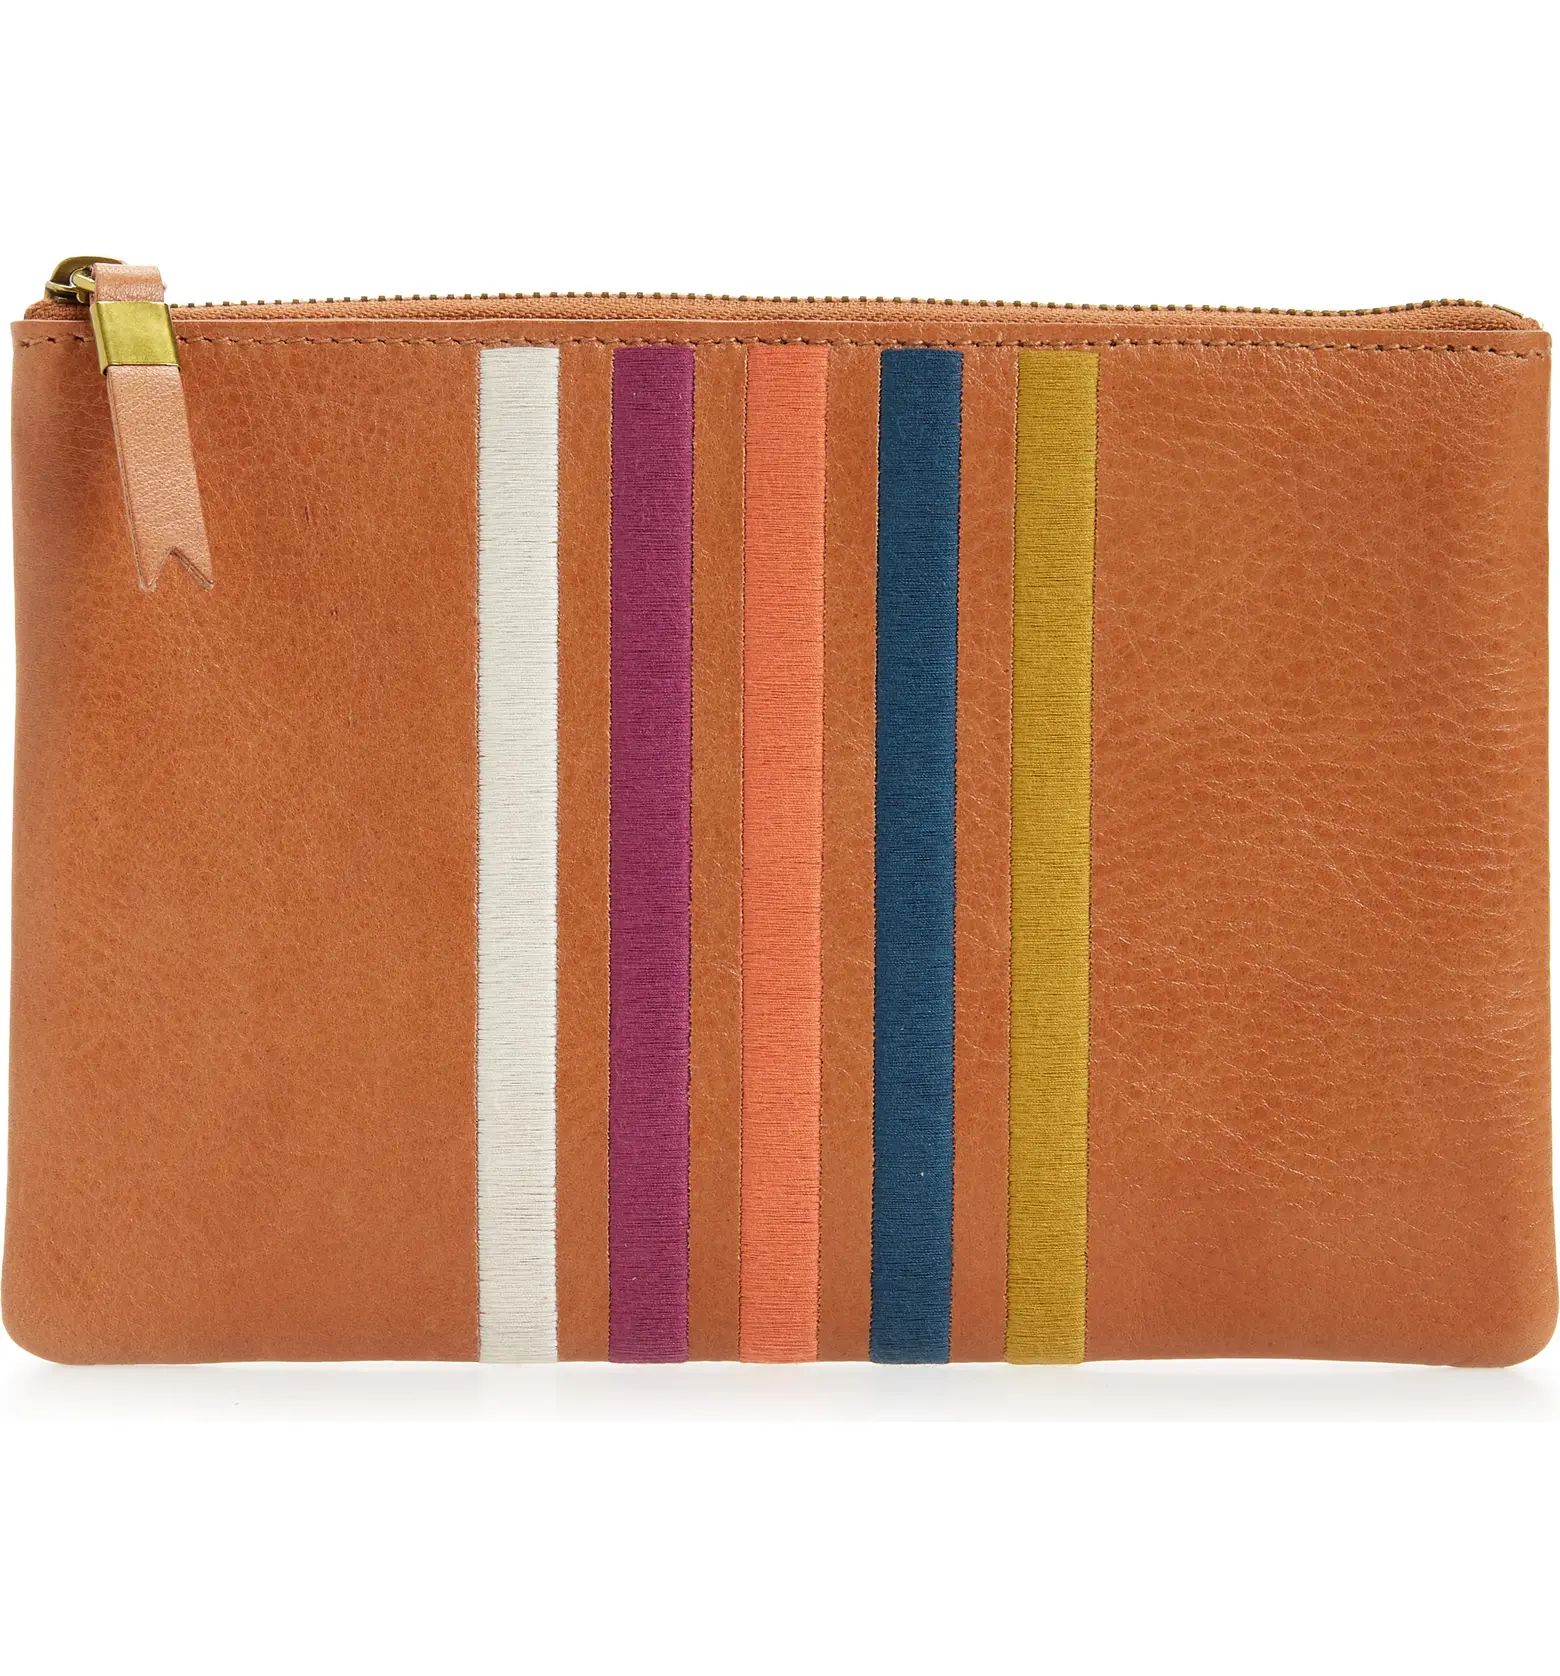 The Leather Pouch Clutch: Embroidered Rainbow Stripes Edition | Nordstrom